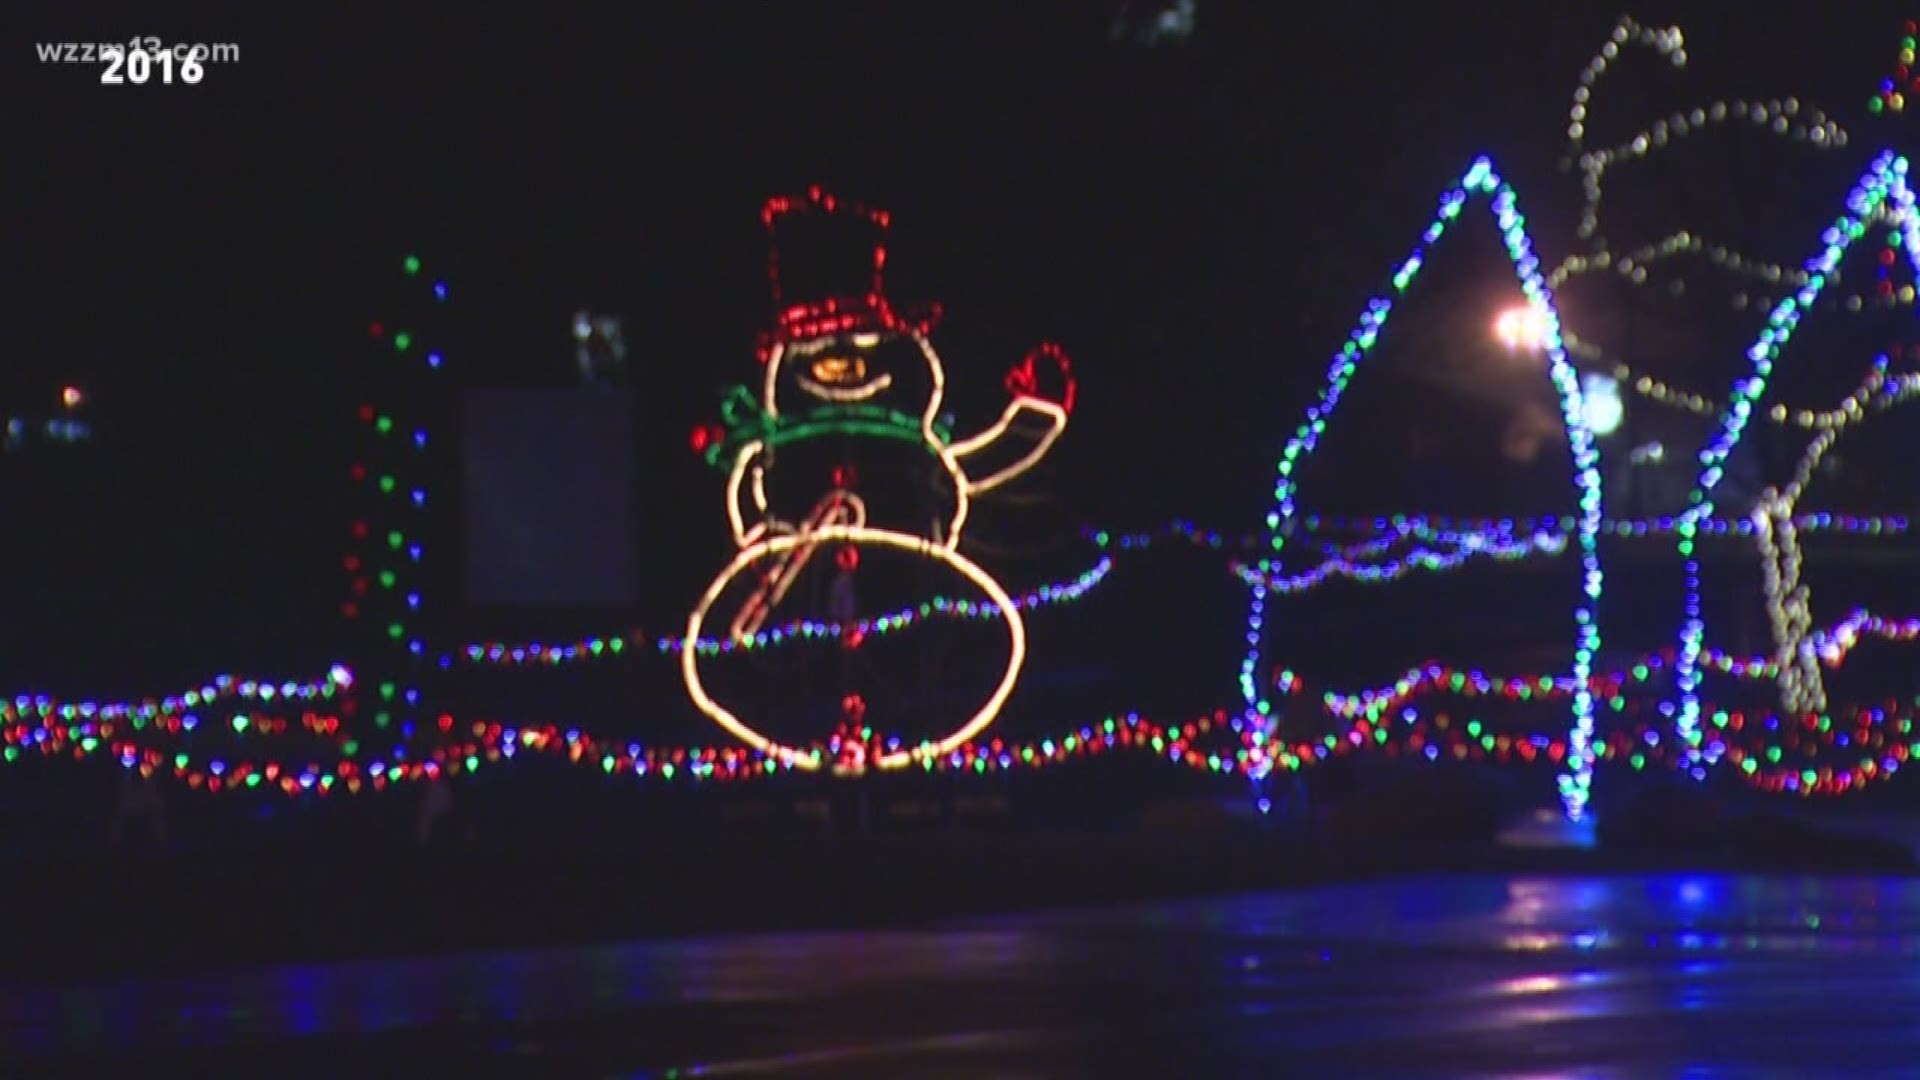 A new study ranks Michigan among the worst states in the U.S. for Christmas spirit.